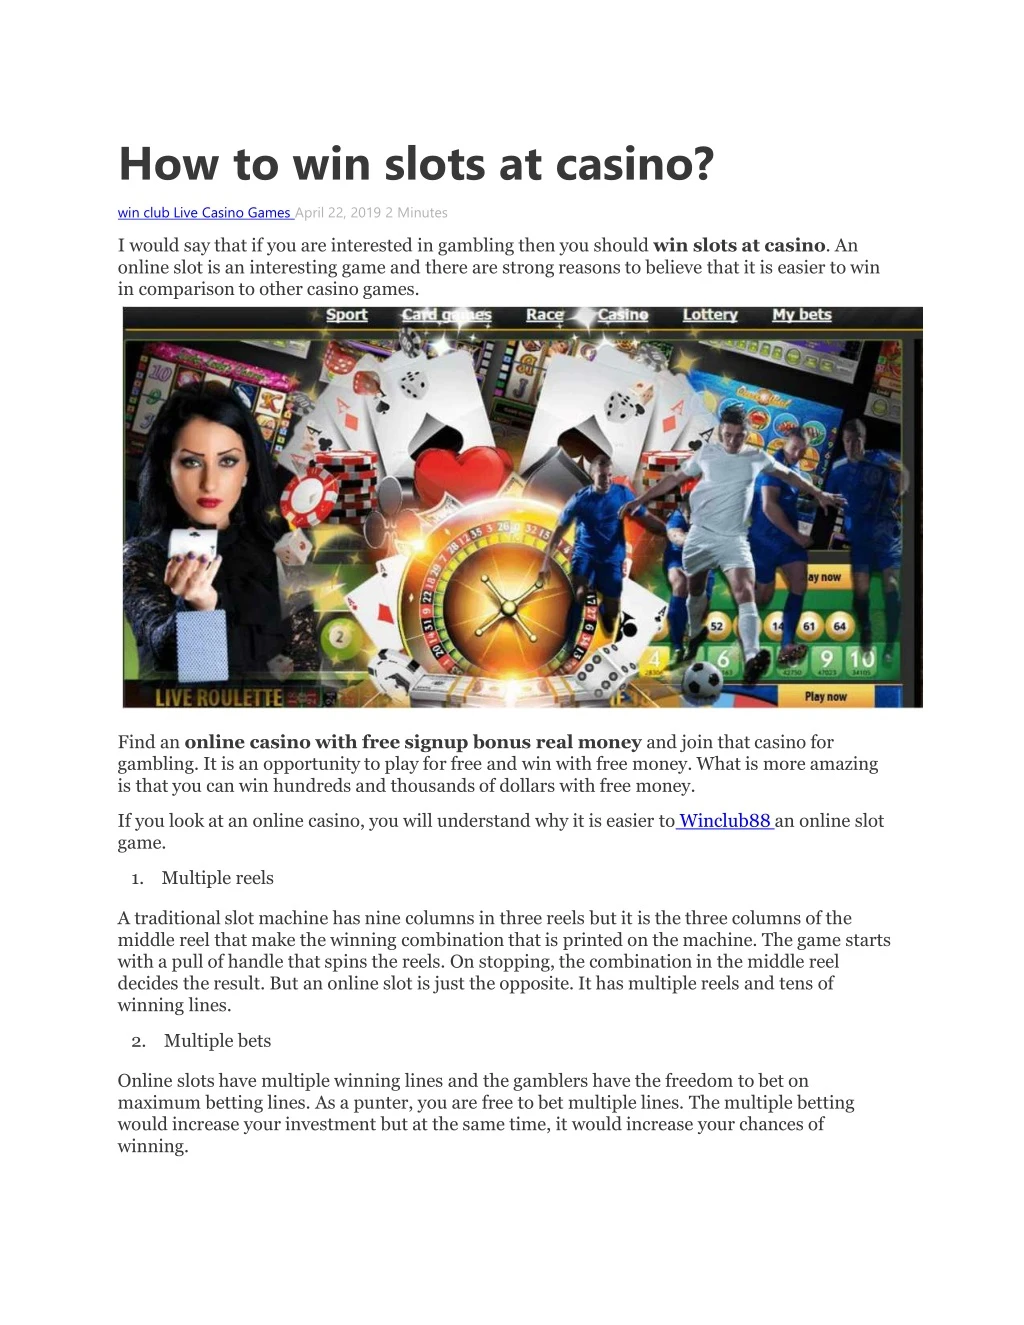 how to win slots at casino win club live casino